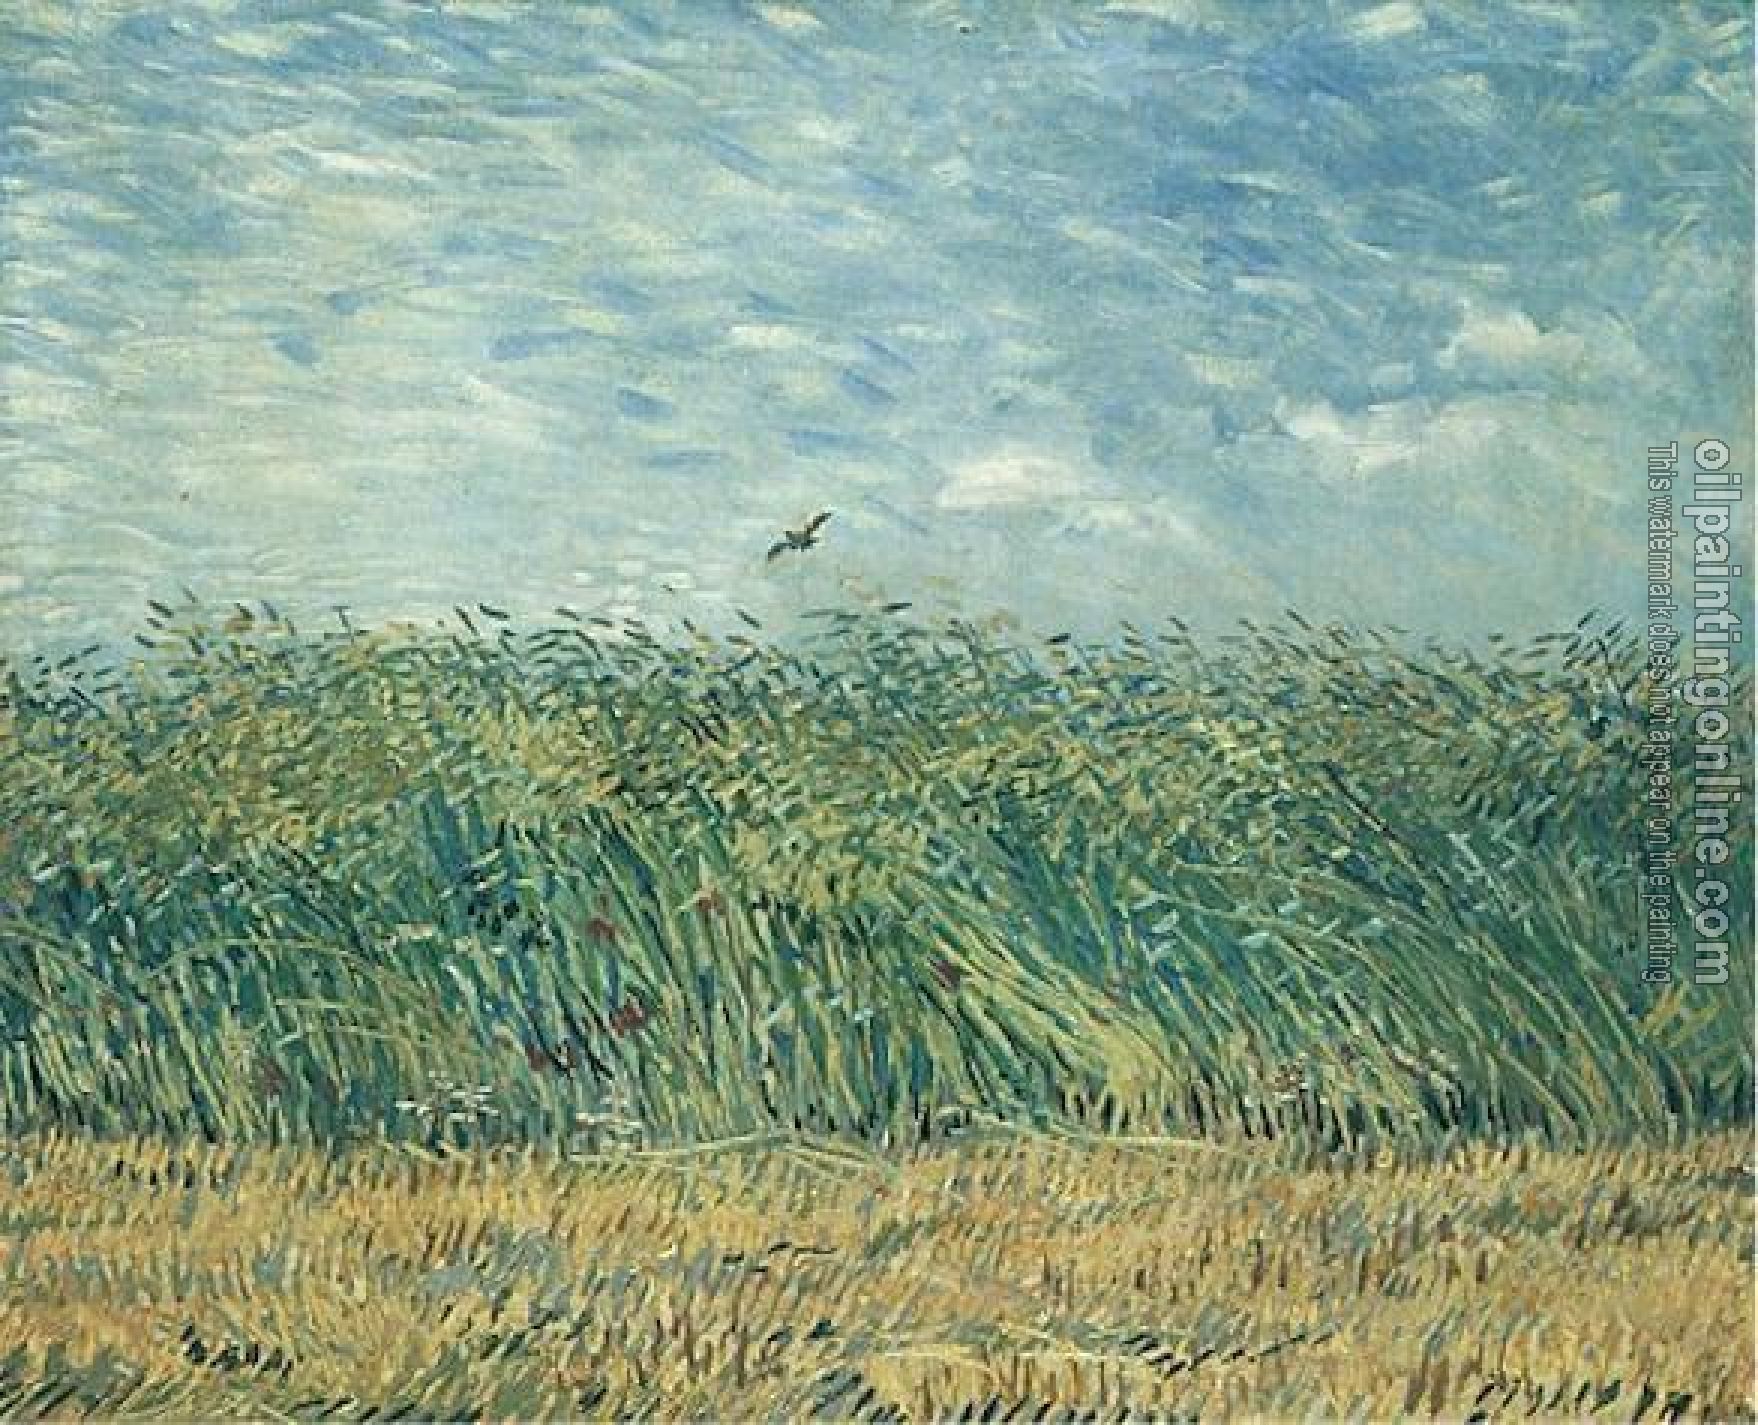 Gogh, Vincent van - Wheat Field with a Lark